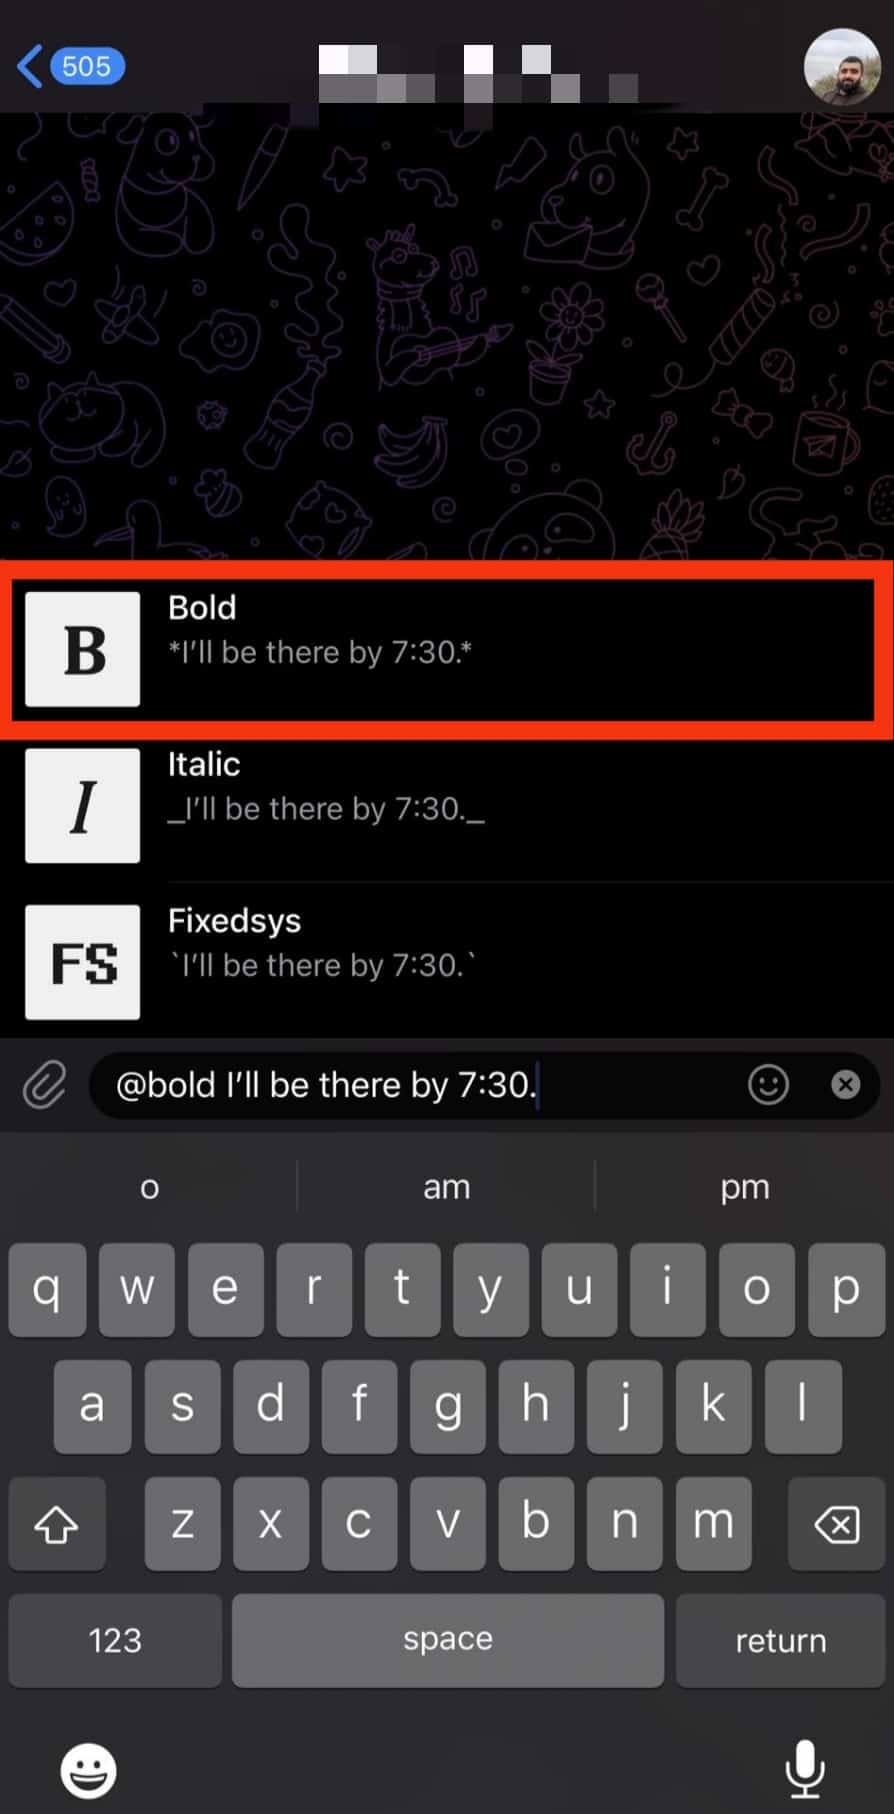 Tap On The Bold Option